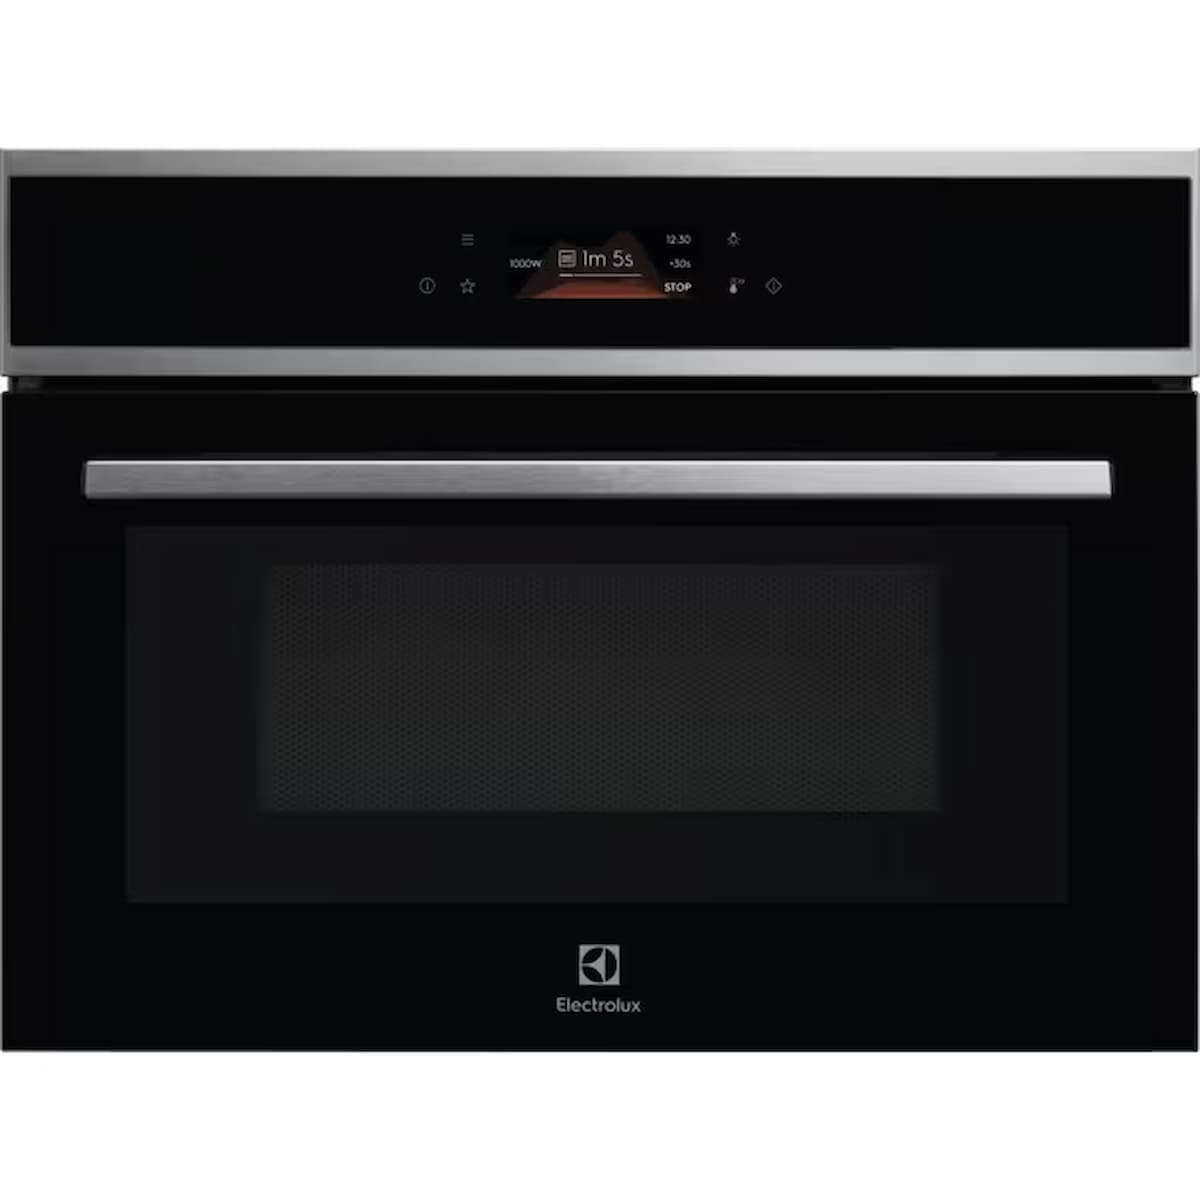 Electrolux 800 CombiQuick Integrated Oven-EVLBE08X